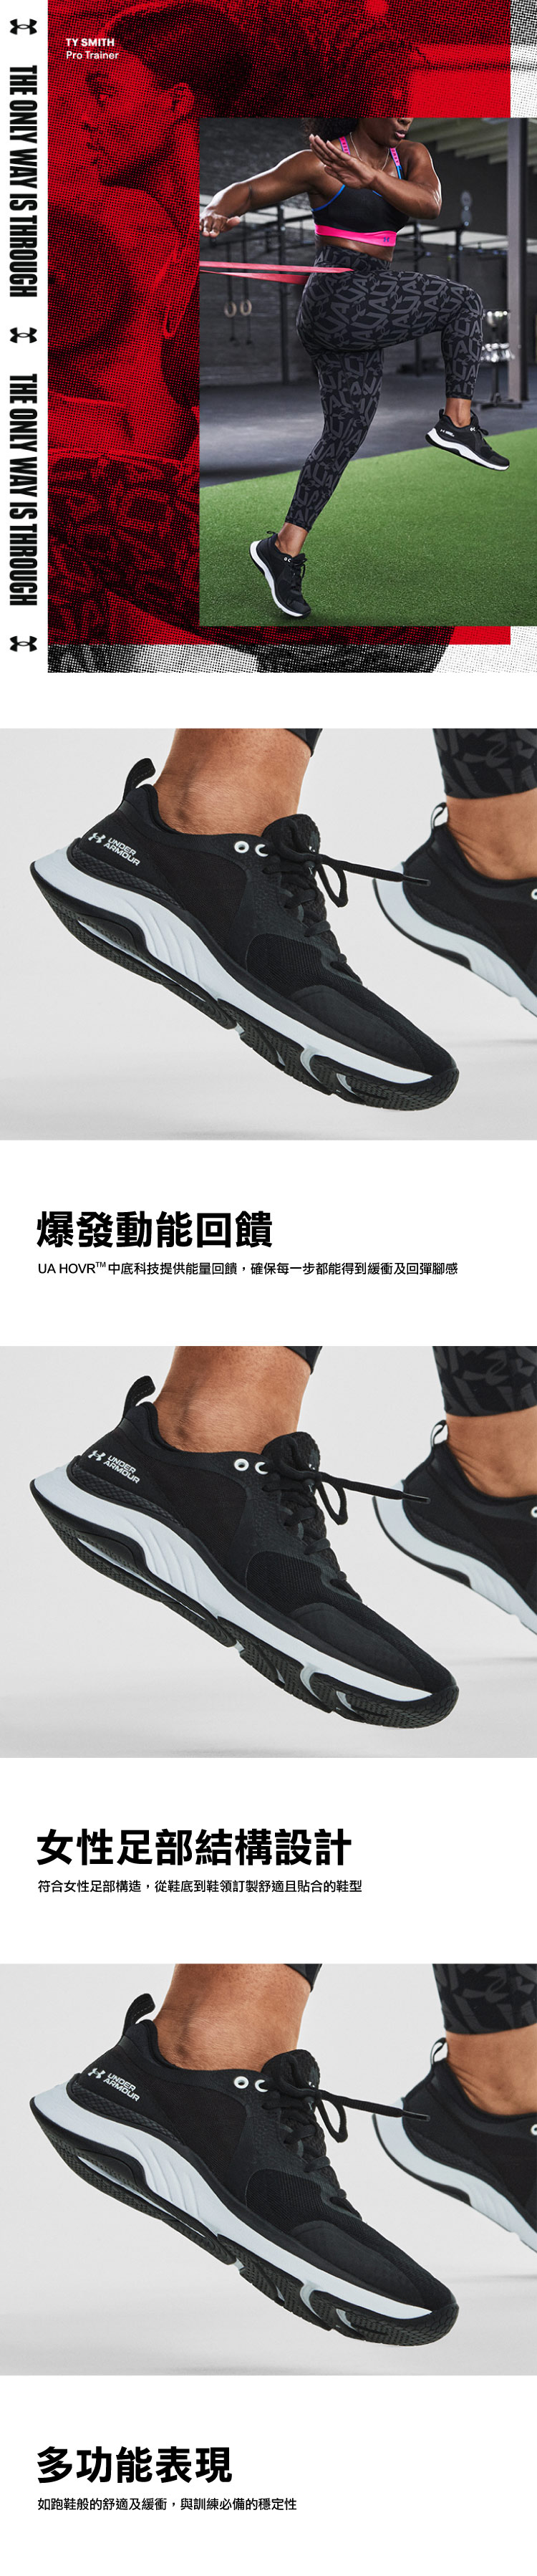 Under Armour HOVR™ Omnia女性專屬訓練鞋